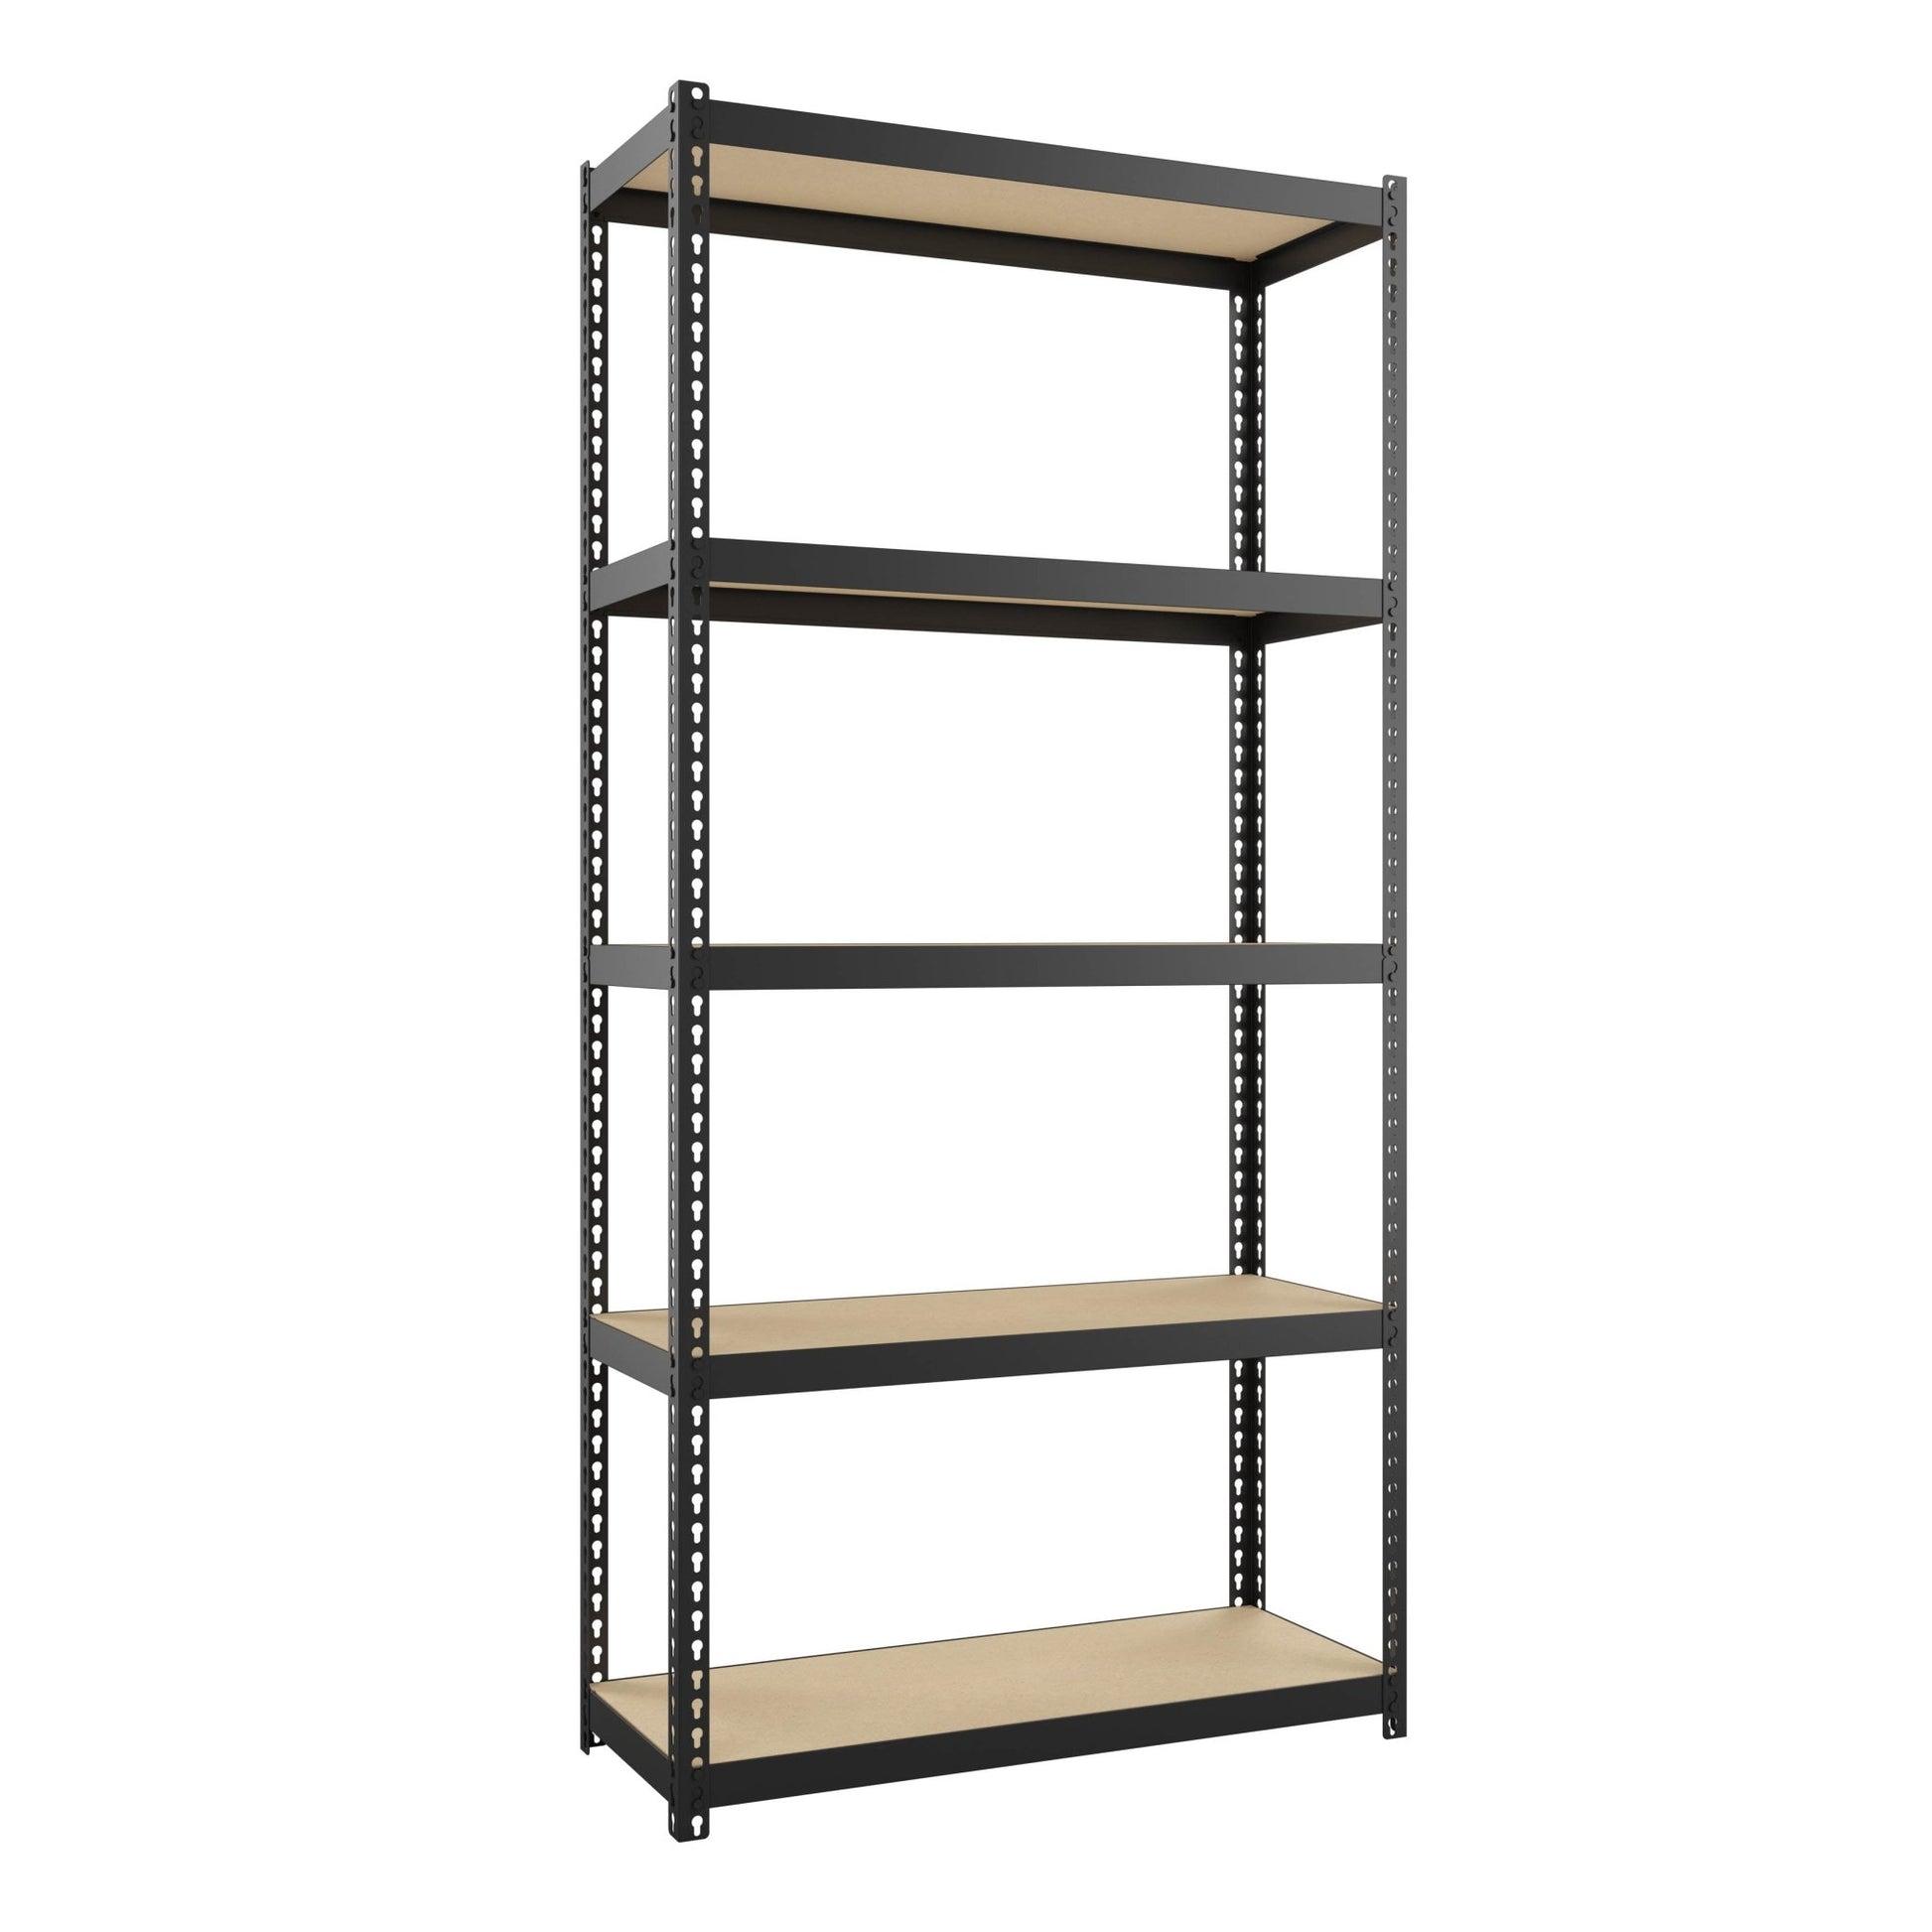 Space Solutions 1000 Riveted Steel Shelving 12"D x 30"W - SchoolOutlet